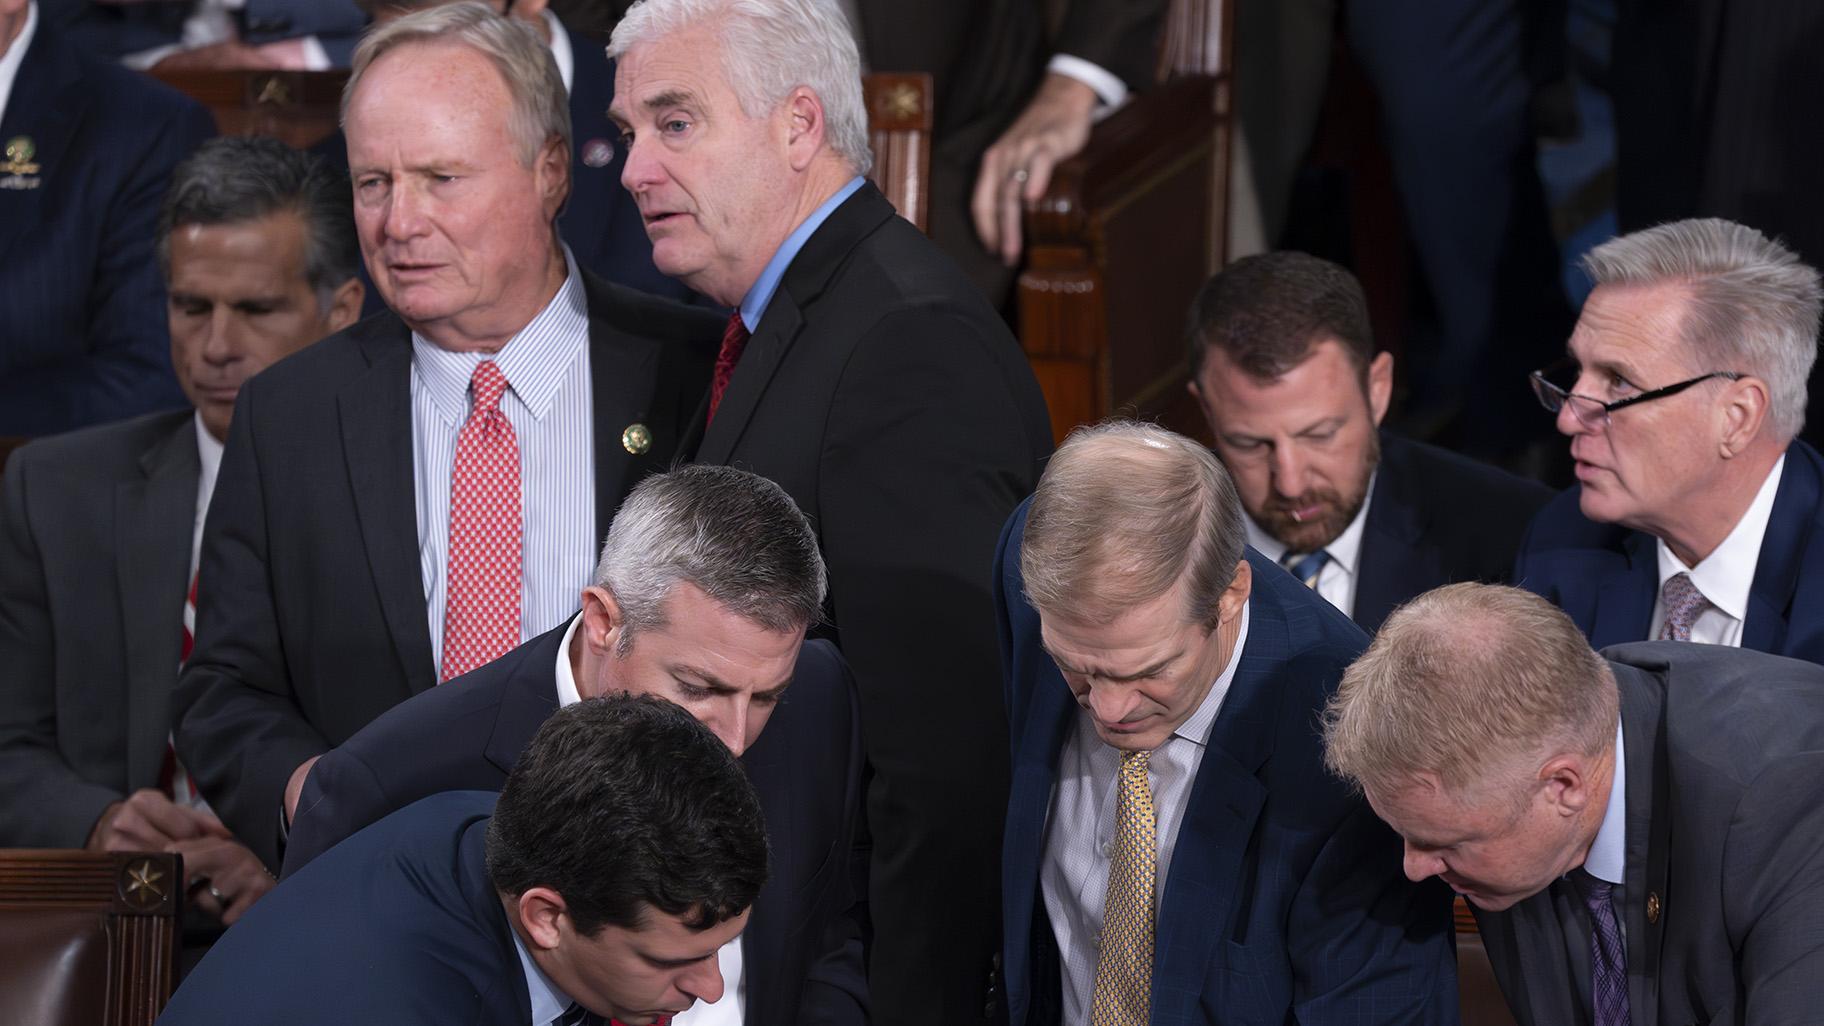 Rep. David Joyce, R-Ohio, upper left, confers with House Majority Whip Tom Emmer, R-Minn., as Rep. Jim Jordan, R-Ohio, center, and former Speaker Kevin McCarthy, R-Calif., far right, tabulate votes as Republicans failed to elect Jordan as speaker, at the Capitol in Washington, Tuesday, Oct. 17, 2023. (AP Photo / J. Scott Applewhite, File)